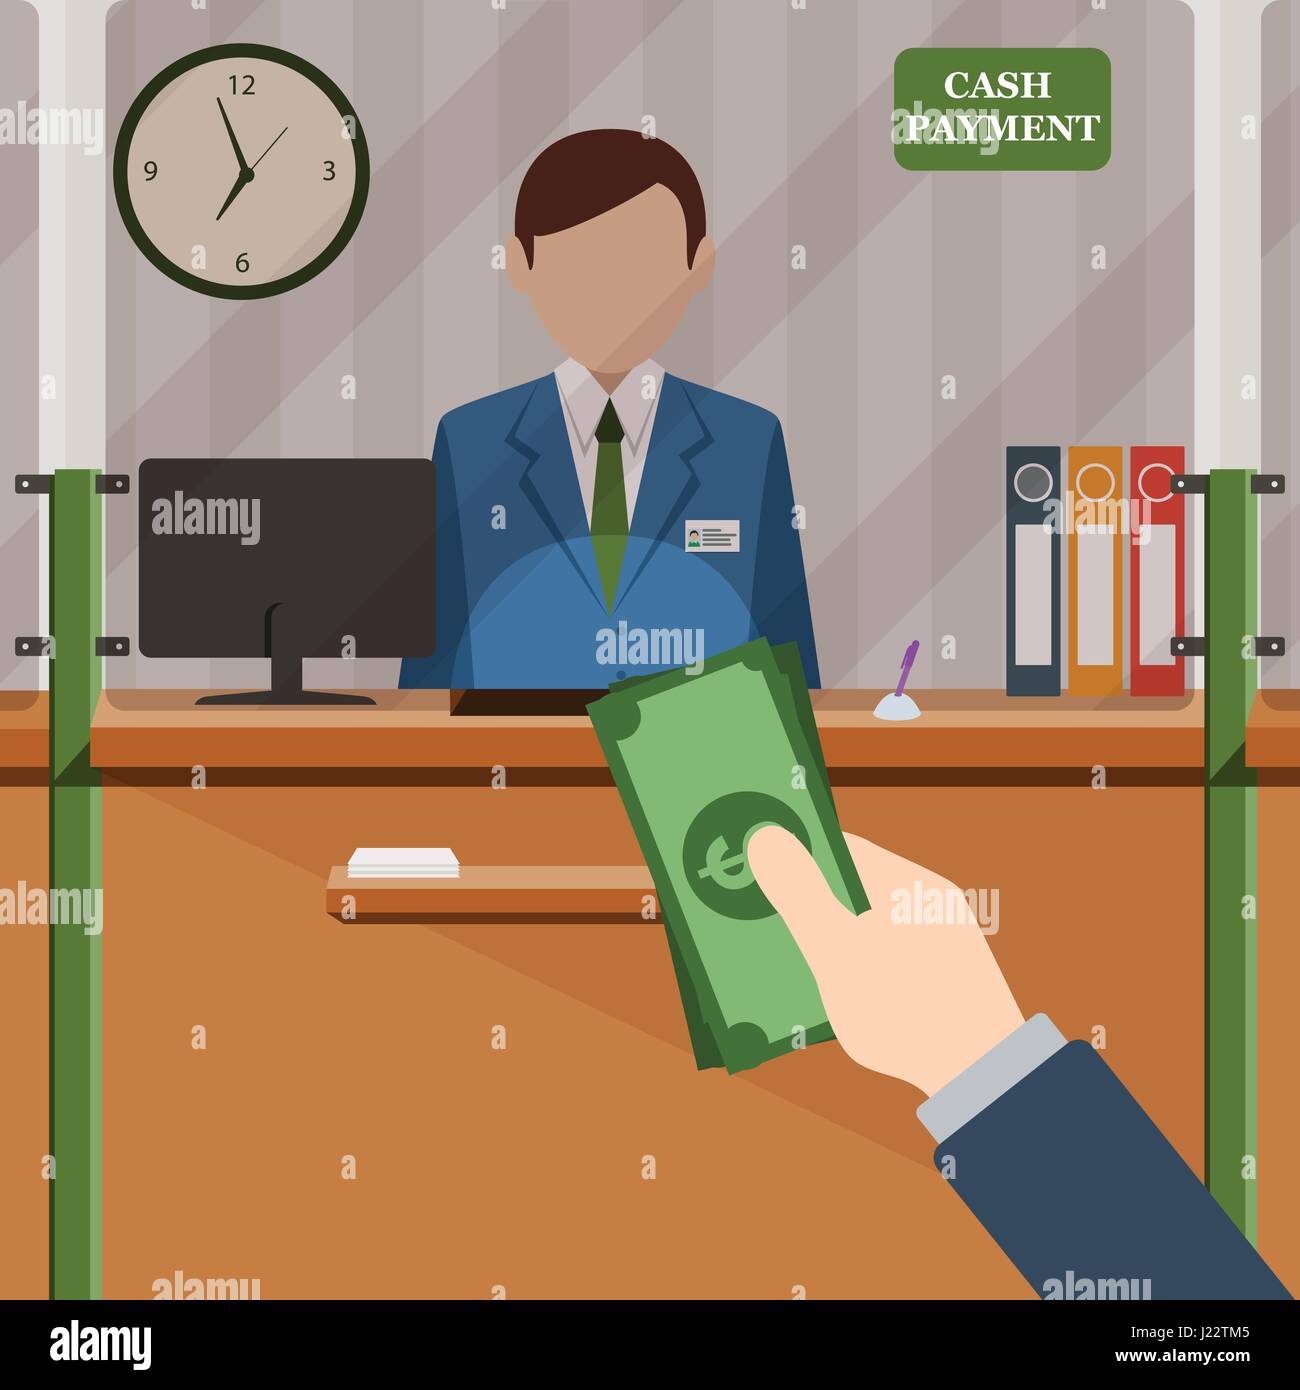 Bank teller behind window. Hand with cash. Depositing money in bank account. Signboard Cash Payment. People service and payment. Vector illustration i Stock Vector